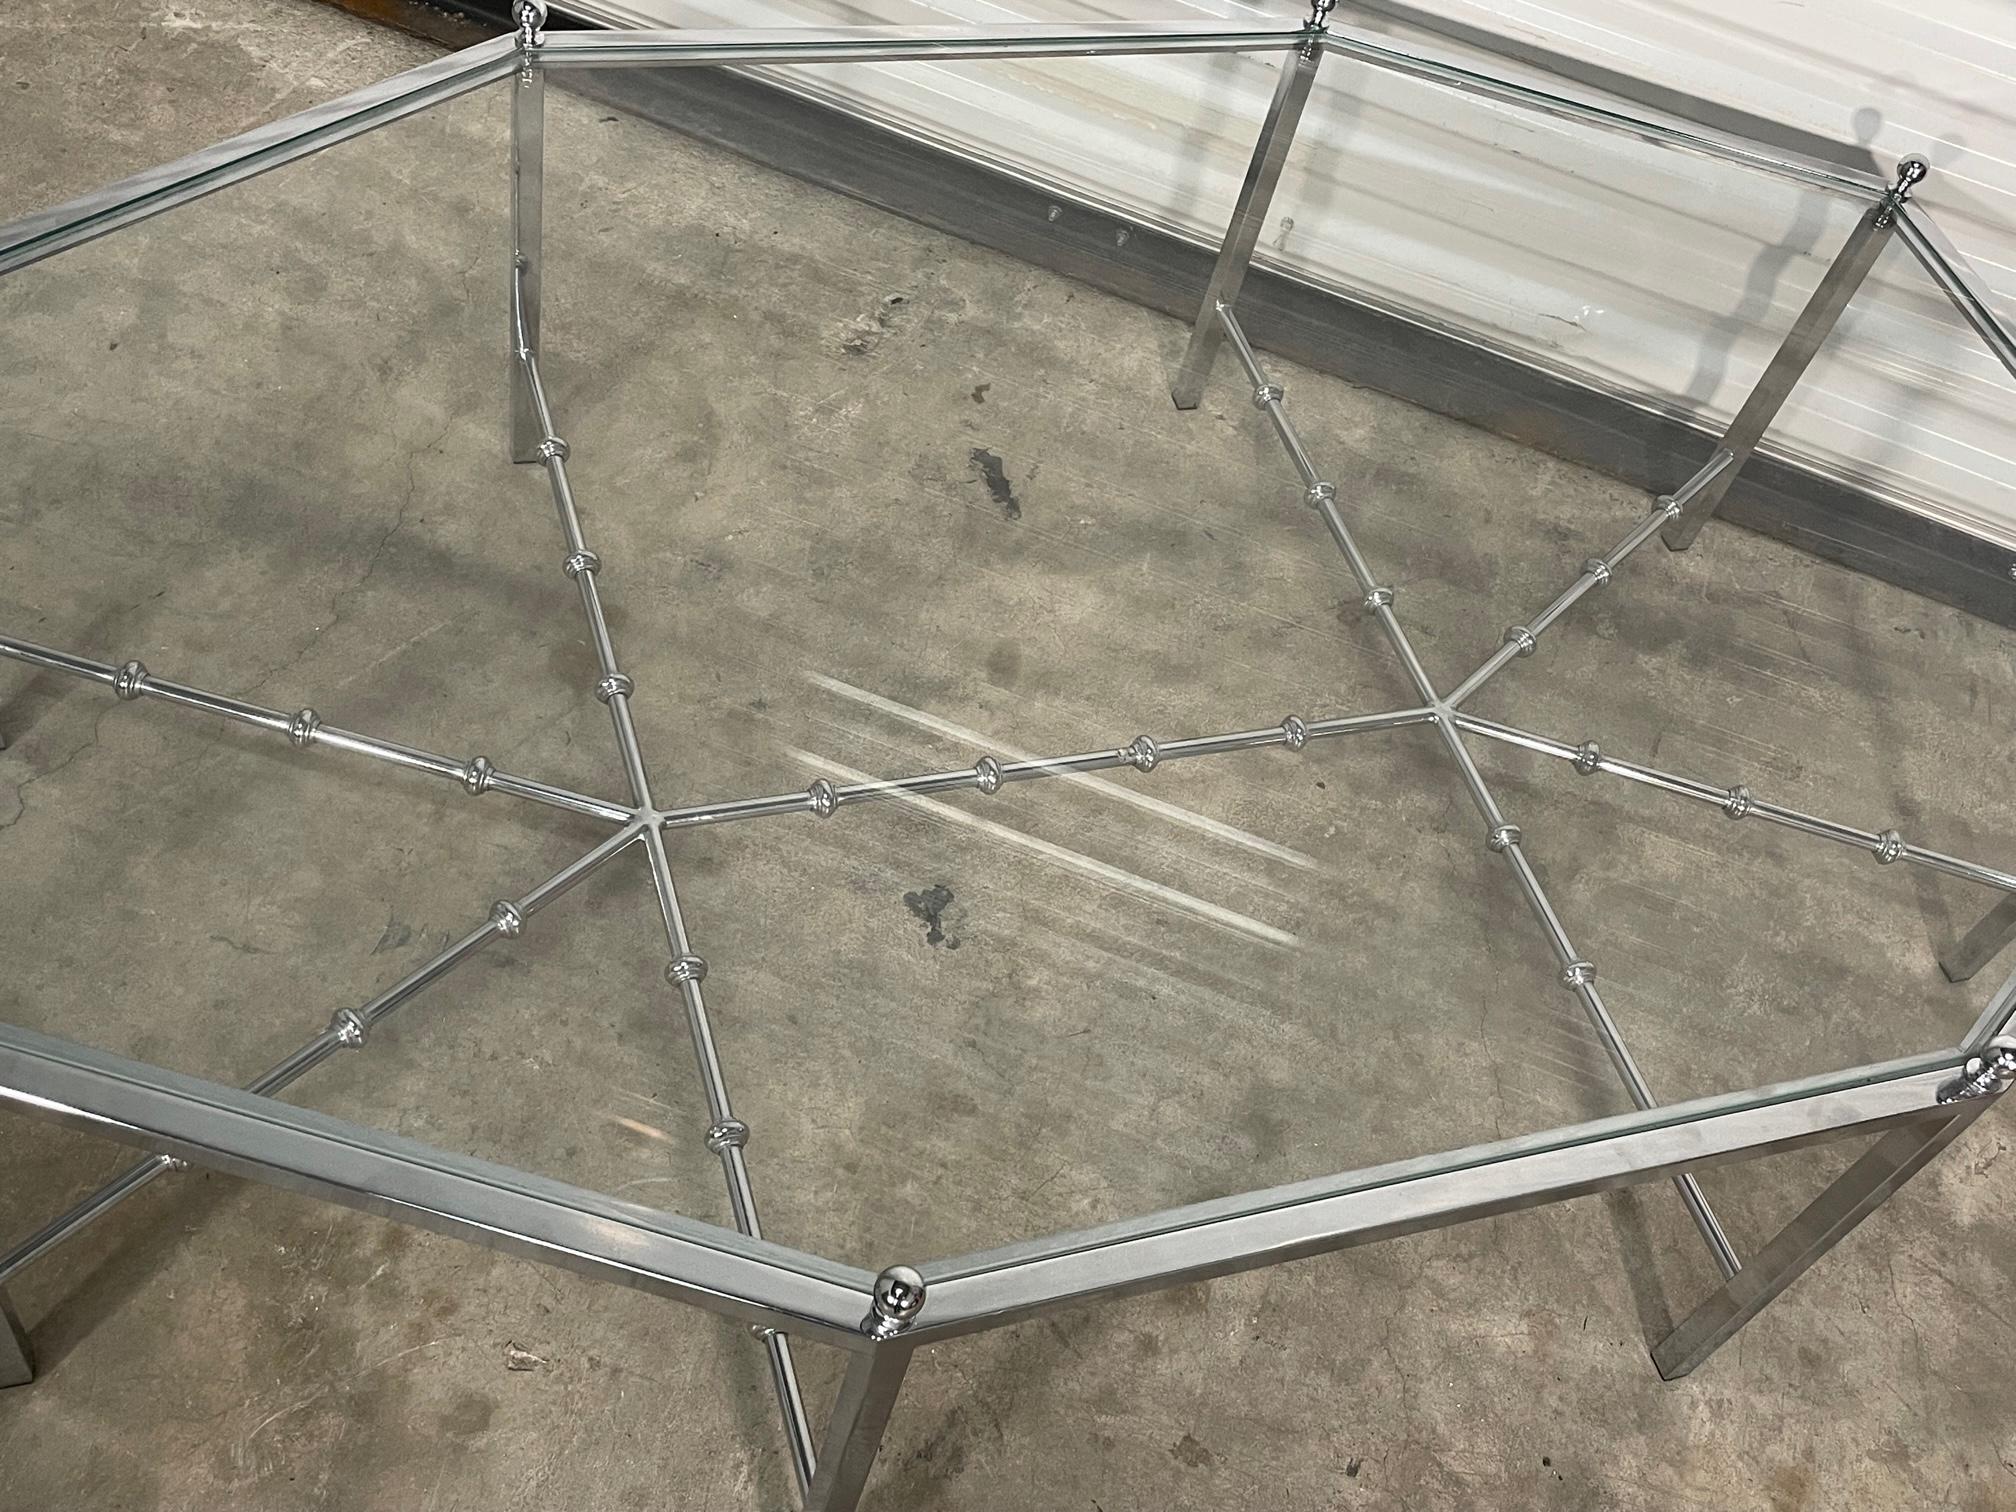 American Chrome and Glass Octagonal Coffee/Cocktail Table by Maison Jansen For Sale